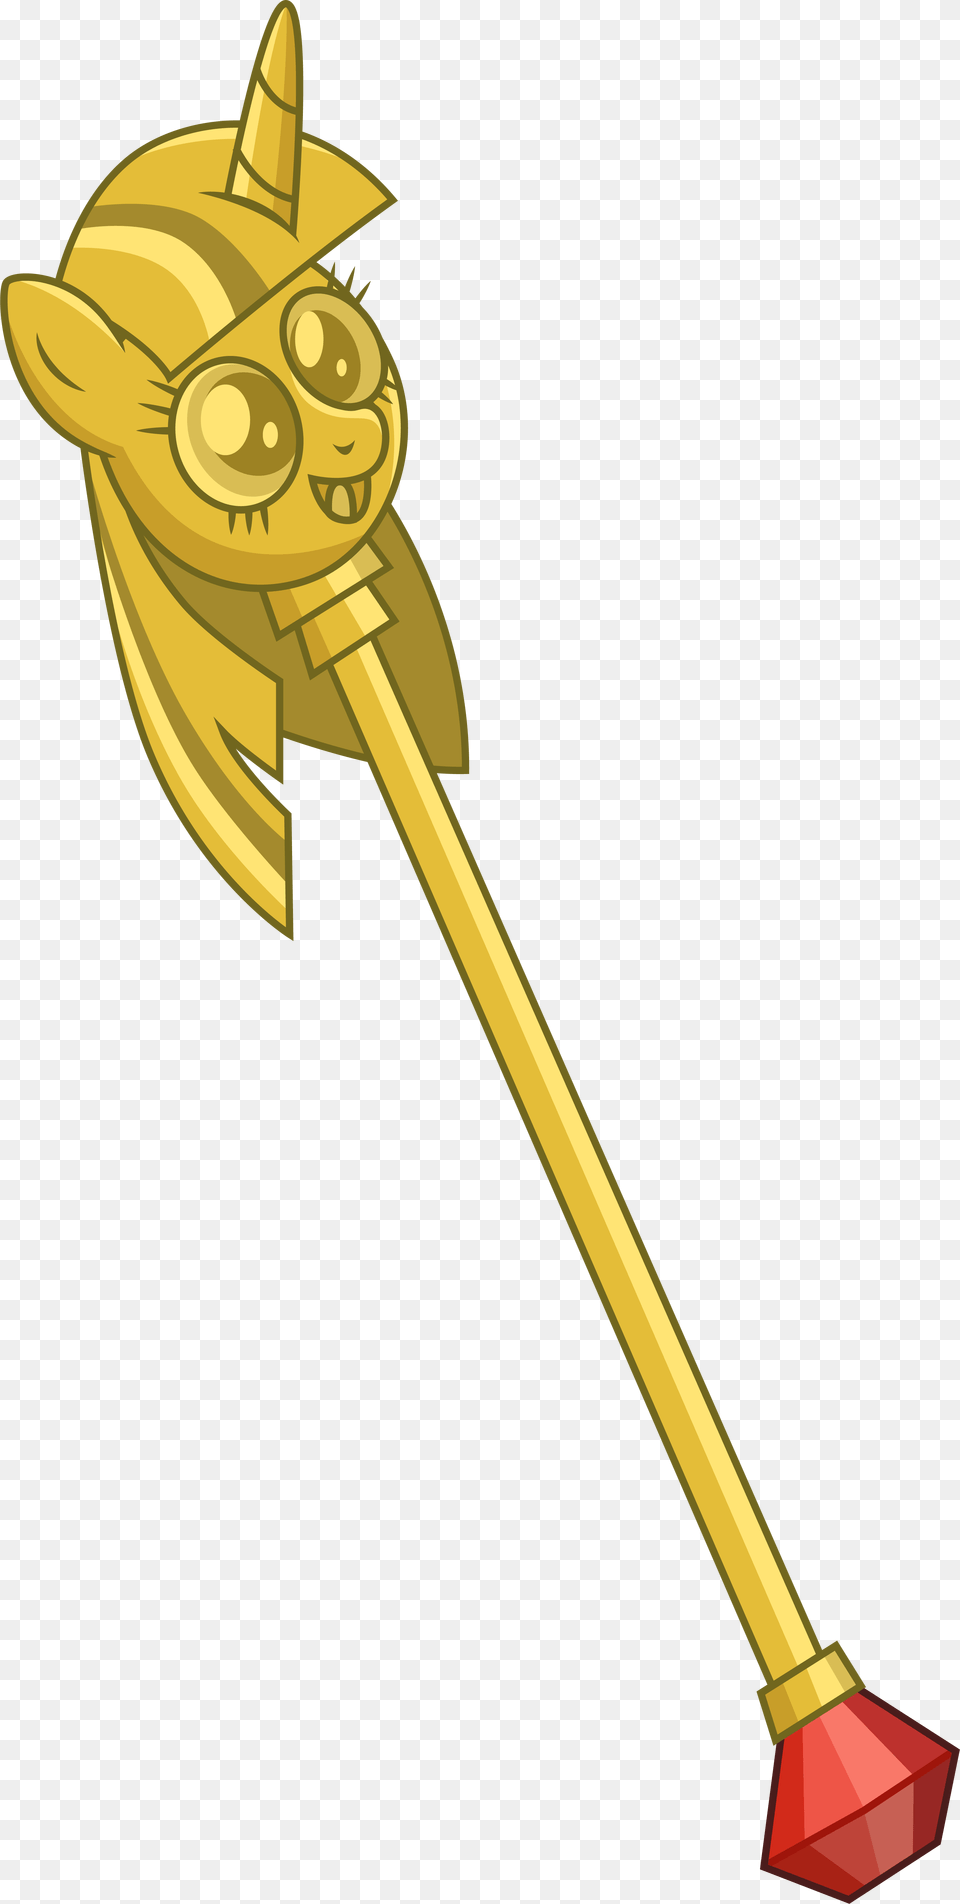 Scepter Image Of A King39s Scepter, Weapon Free Png